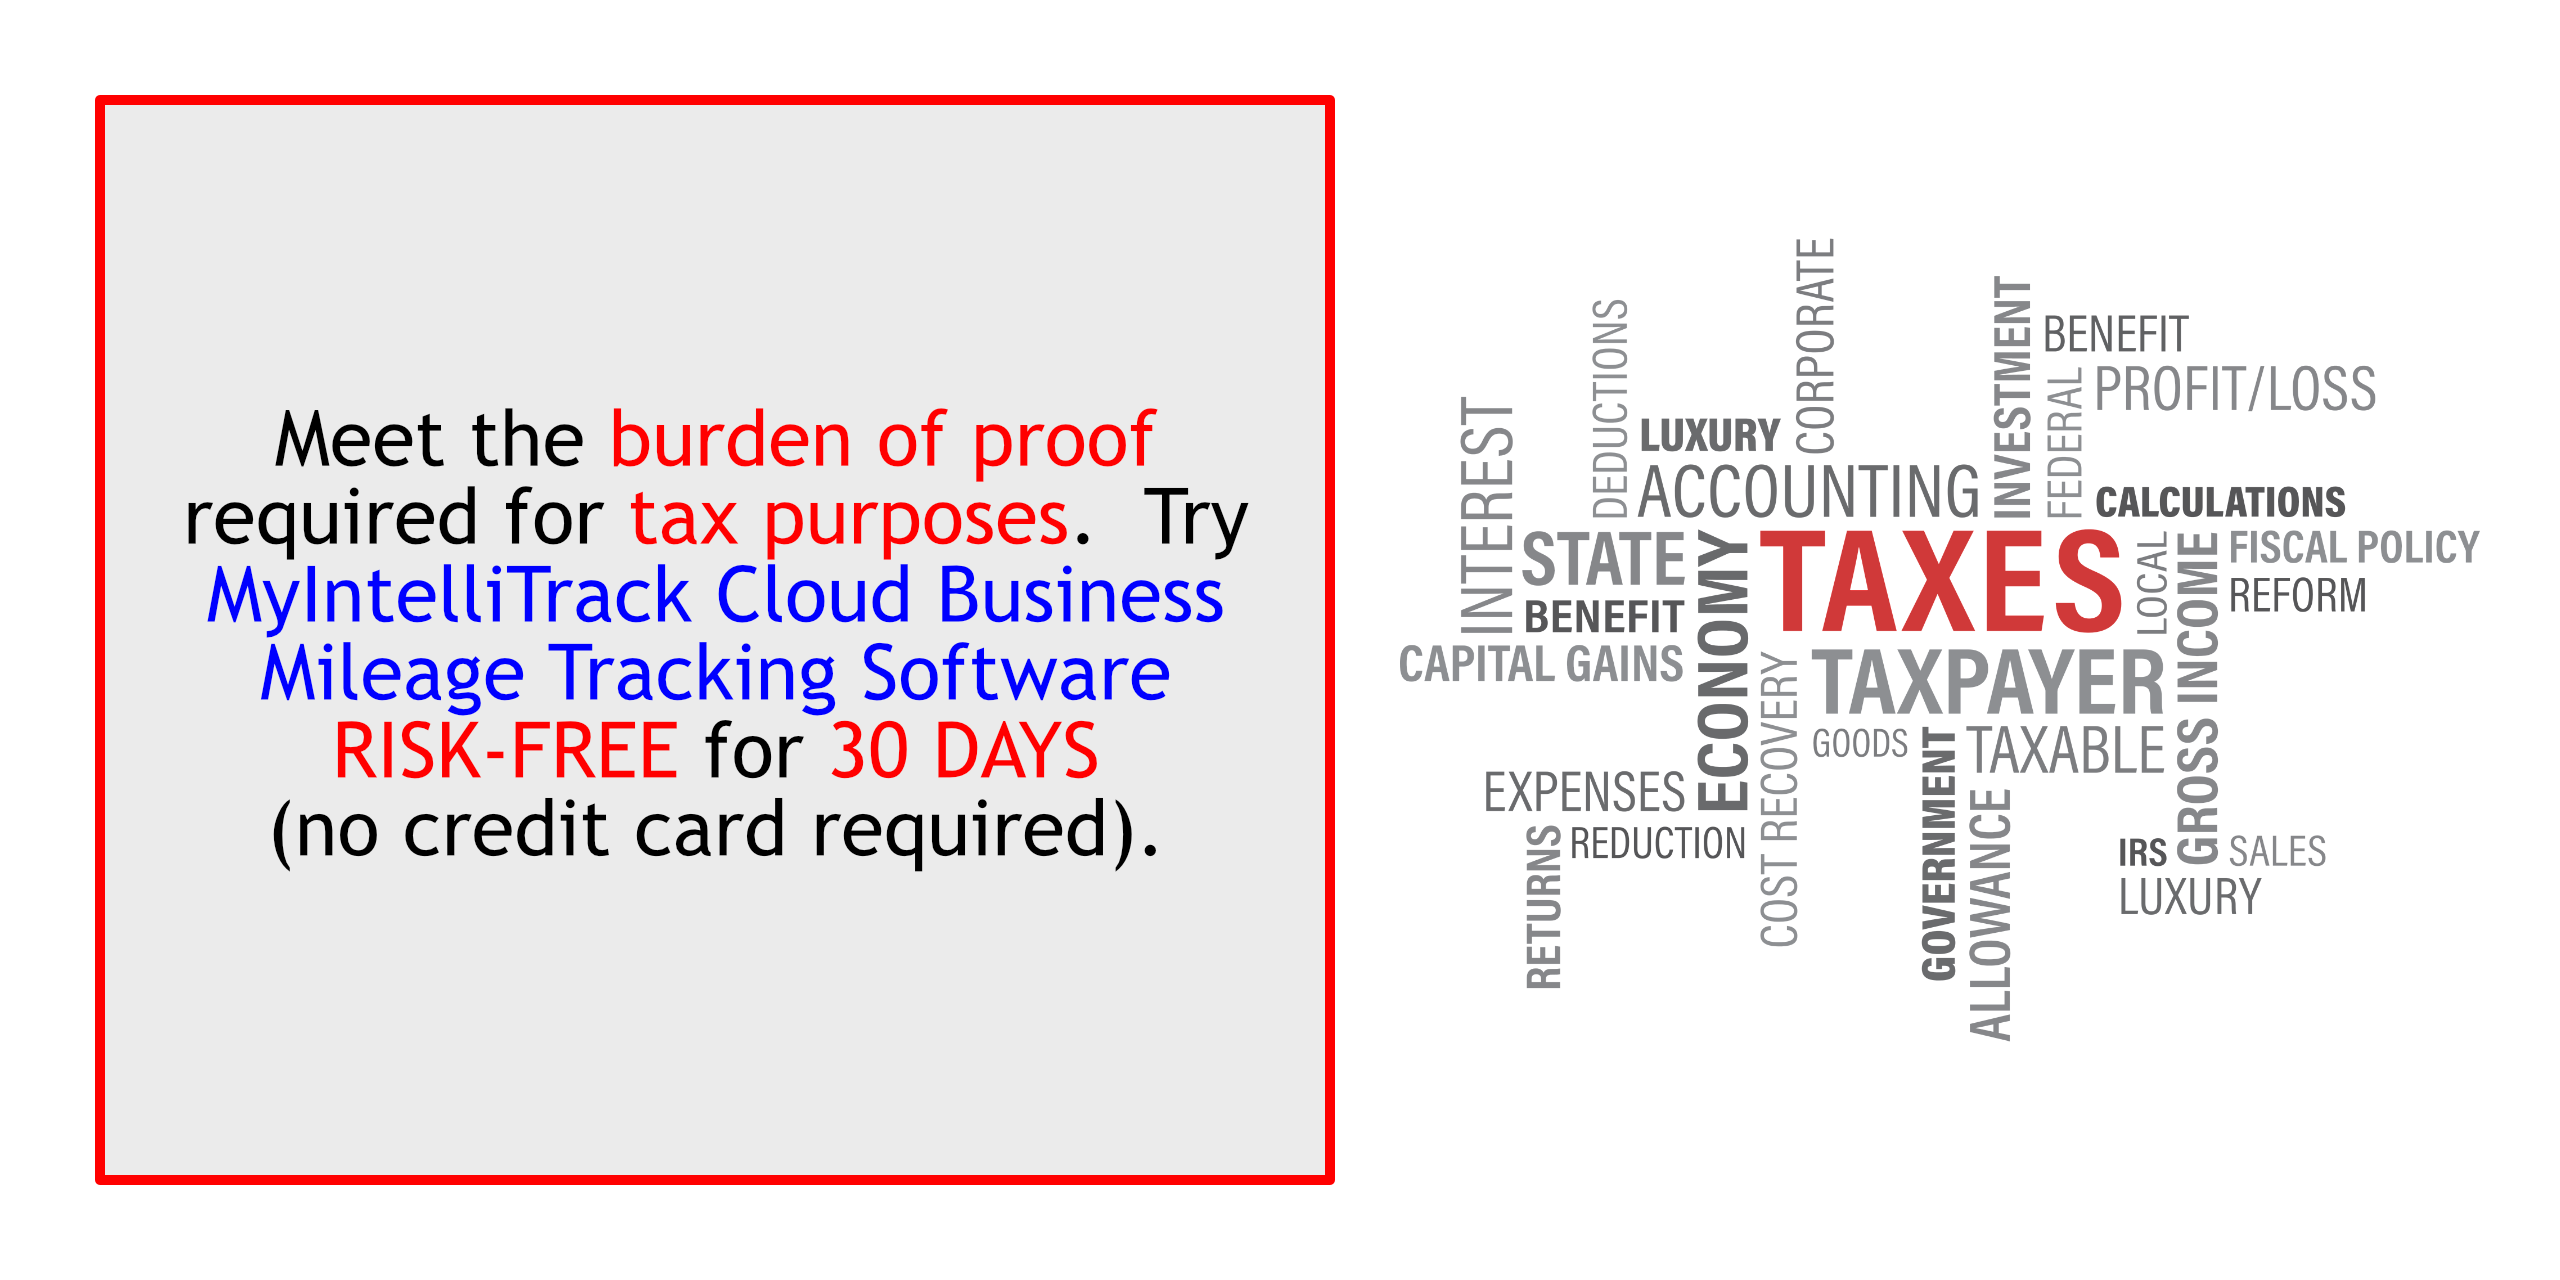 Meet the burden of proof required for tax purposes.  Download MyIntelliTrack Business Mileage Tracker.  Try RISK-FREE FOR THIRTY (30) DAYS (NO CREDIT CARD REQUIRED; CANCELS AUTOMATICALLY IF YOU DECIDE NOT TO SUBSCRIBE).